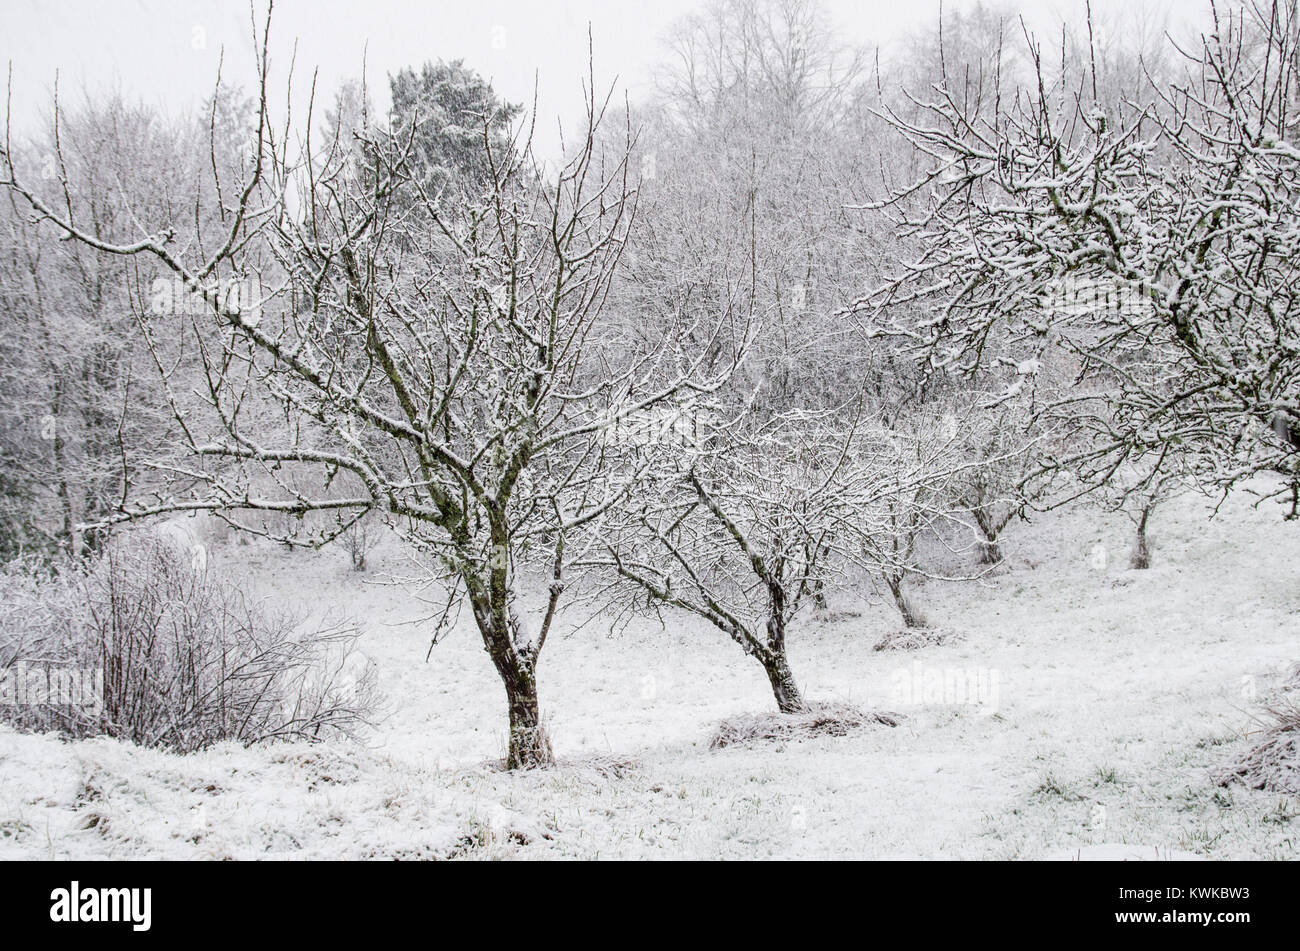 A scene in a snow covered apple tree garden during snowfall. Stock Photo